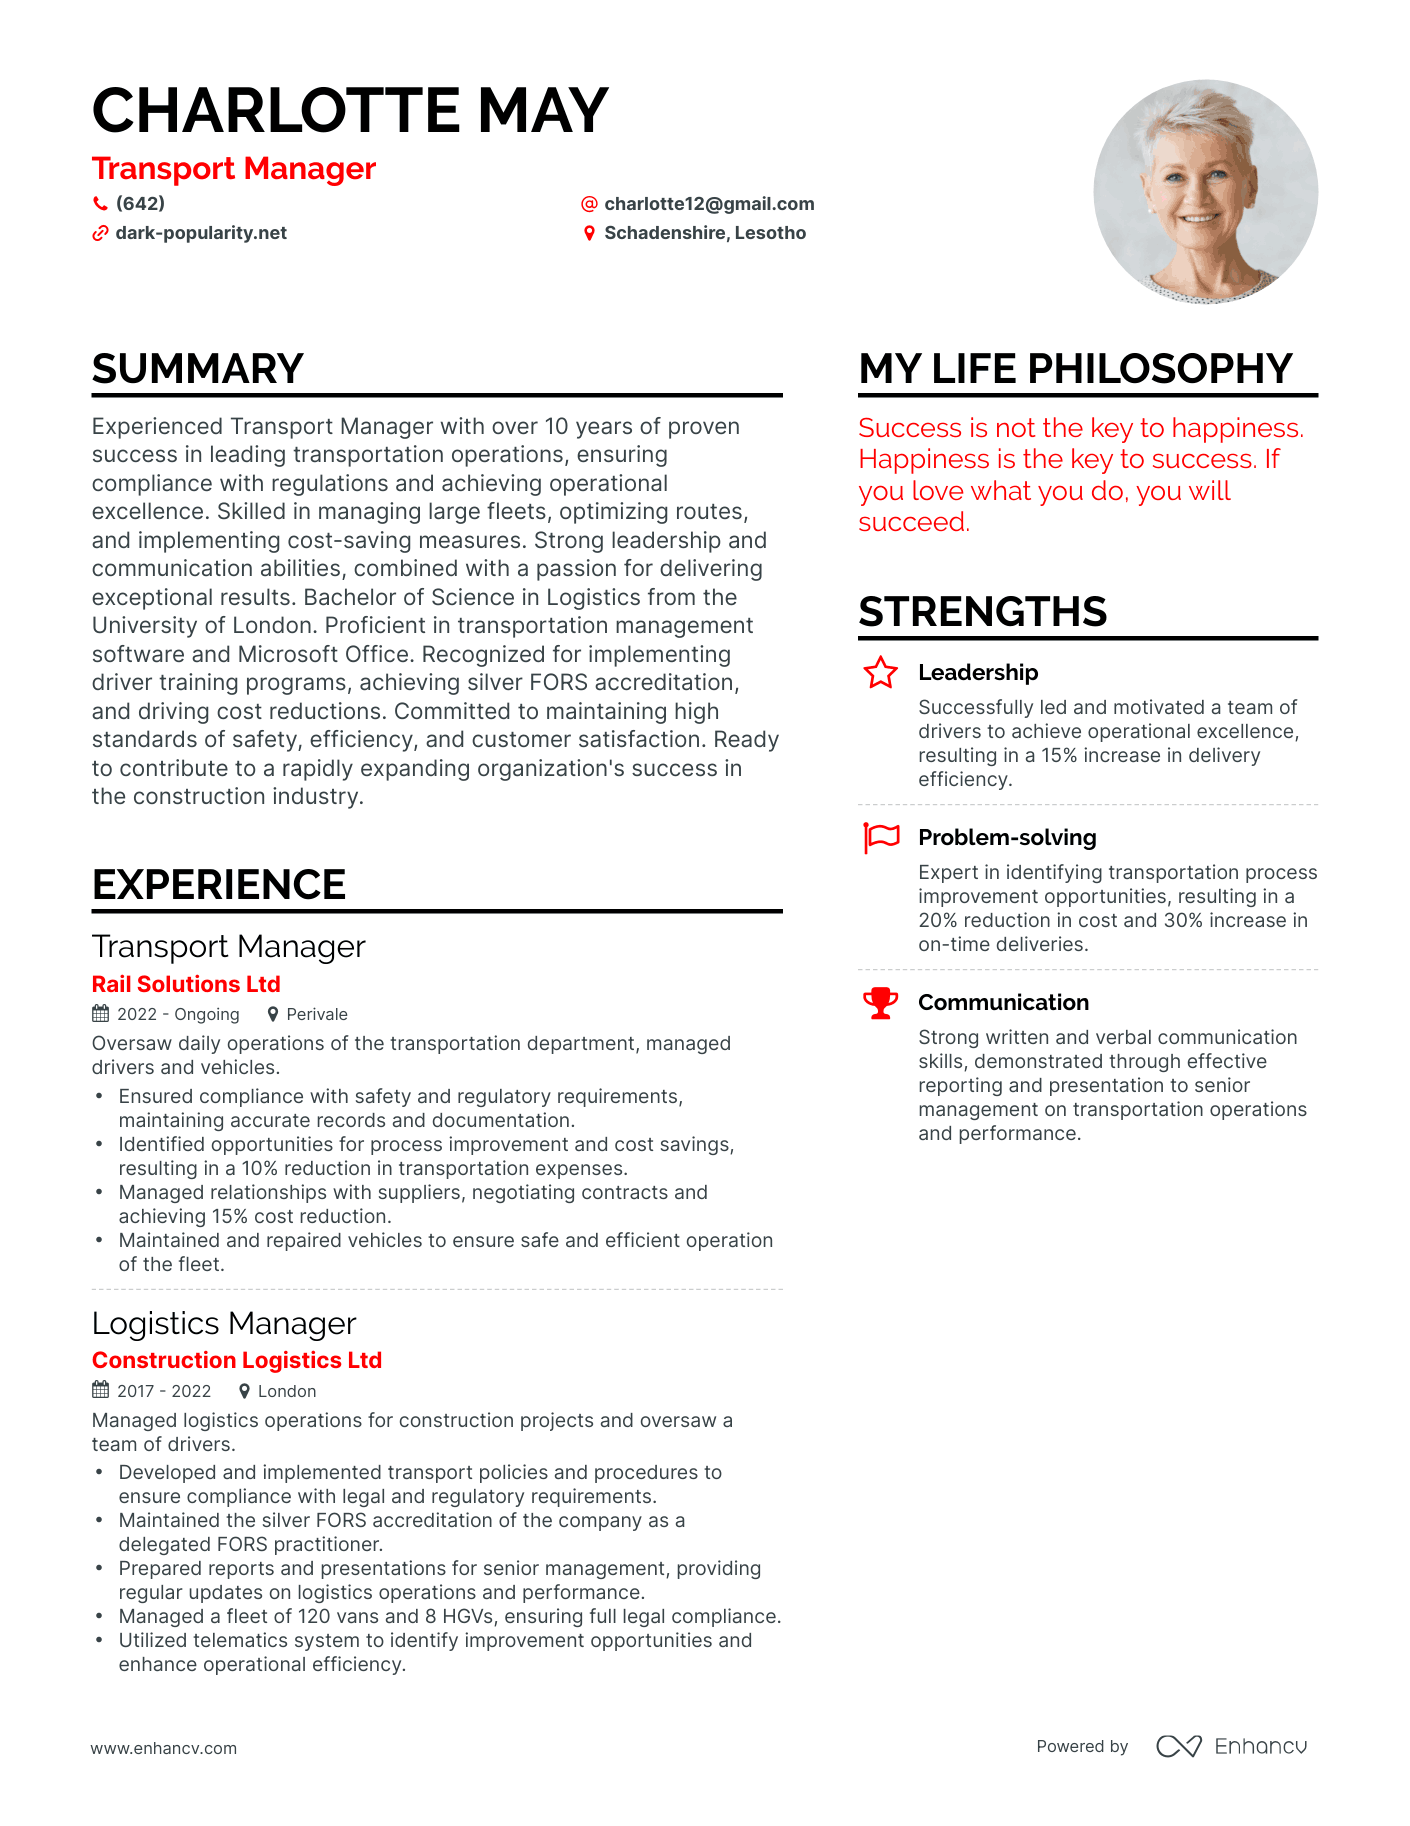 Transport Manager resume example